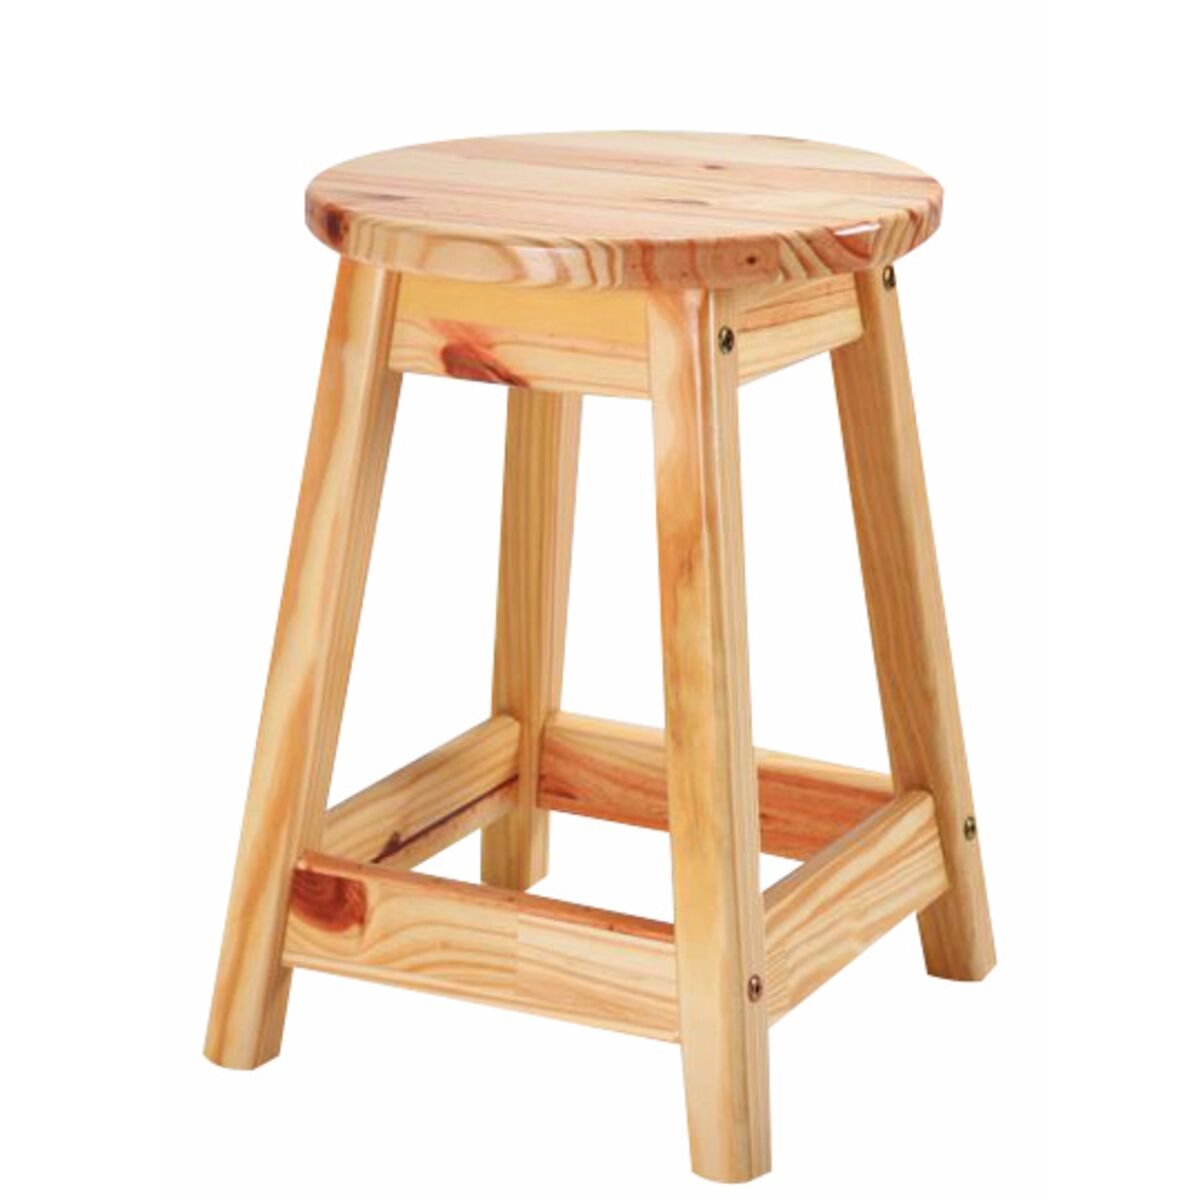 Tramontina Natural Pine Wood Stool with Varnished Finish